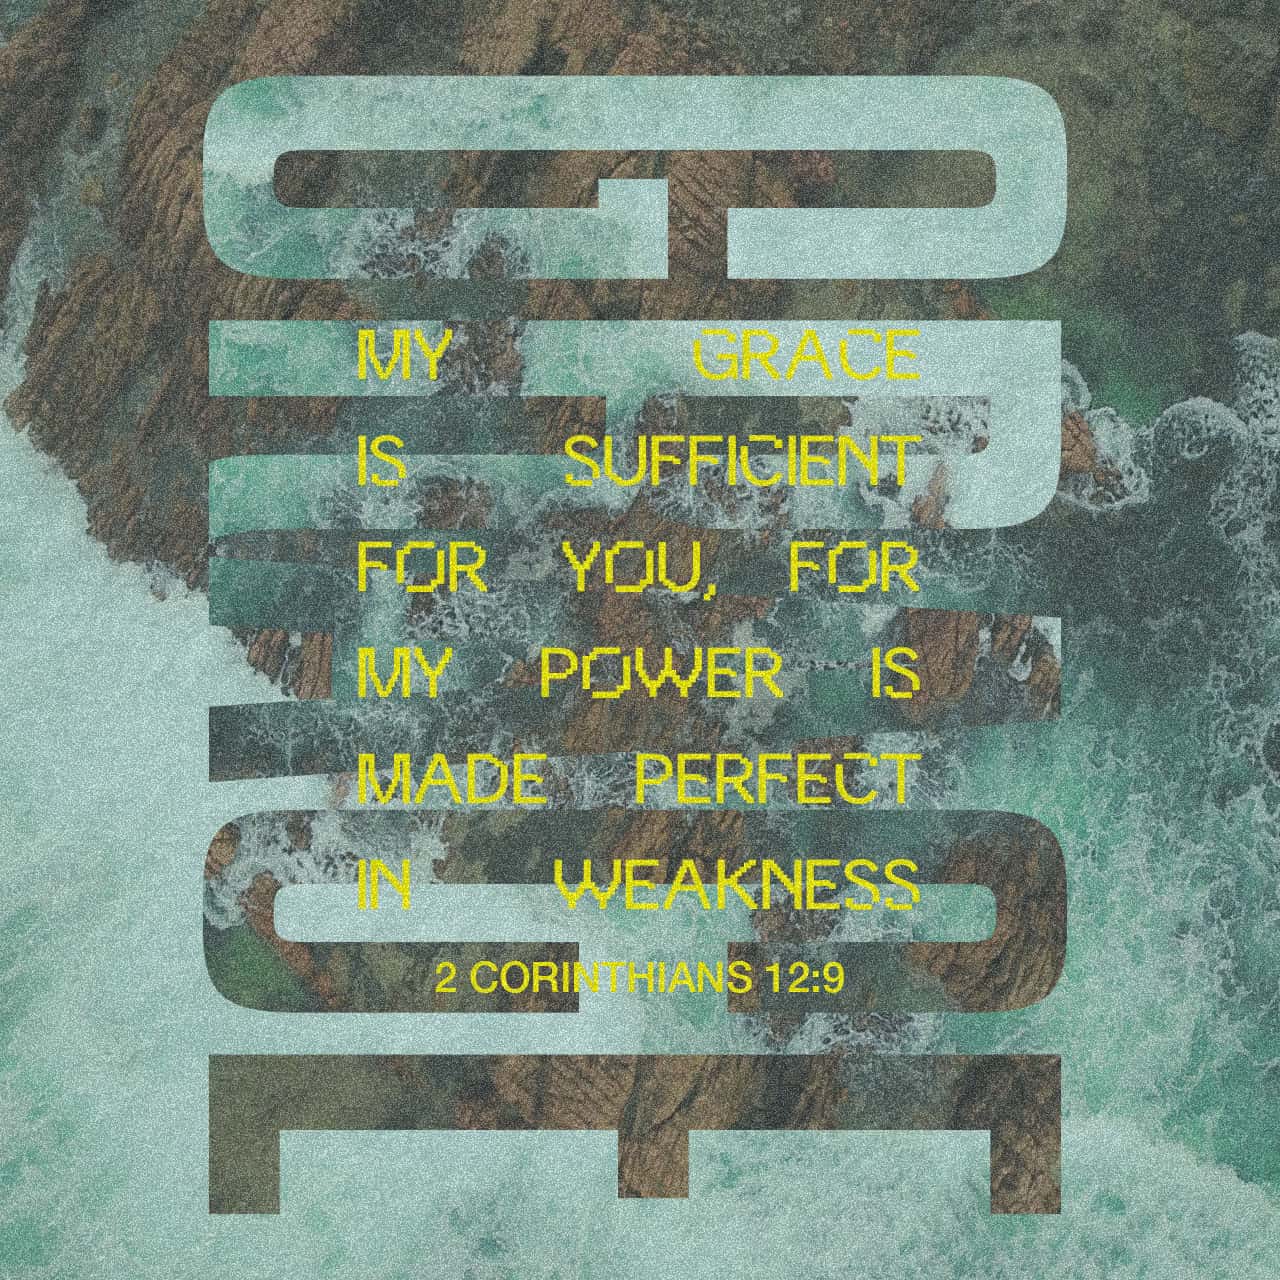 2 Corinthians 12:9 And he said unto me, My grace is sufficient for thee: for my strength is made perfect in weakness. Most gladly therefore will I rather glory in my infirmities, that the power of Christ may rest upon m | King James Version (KJV) | Downlo